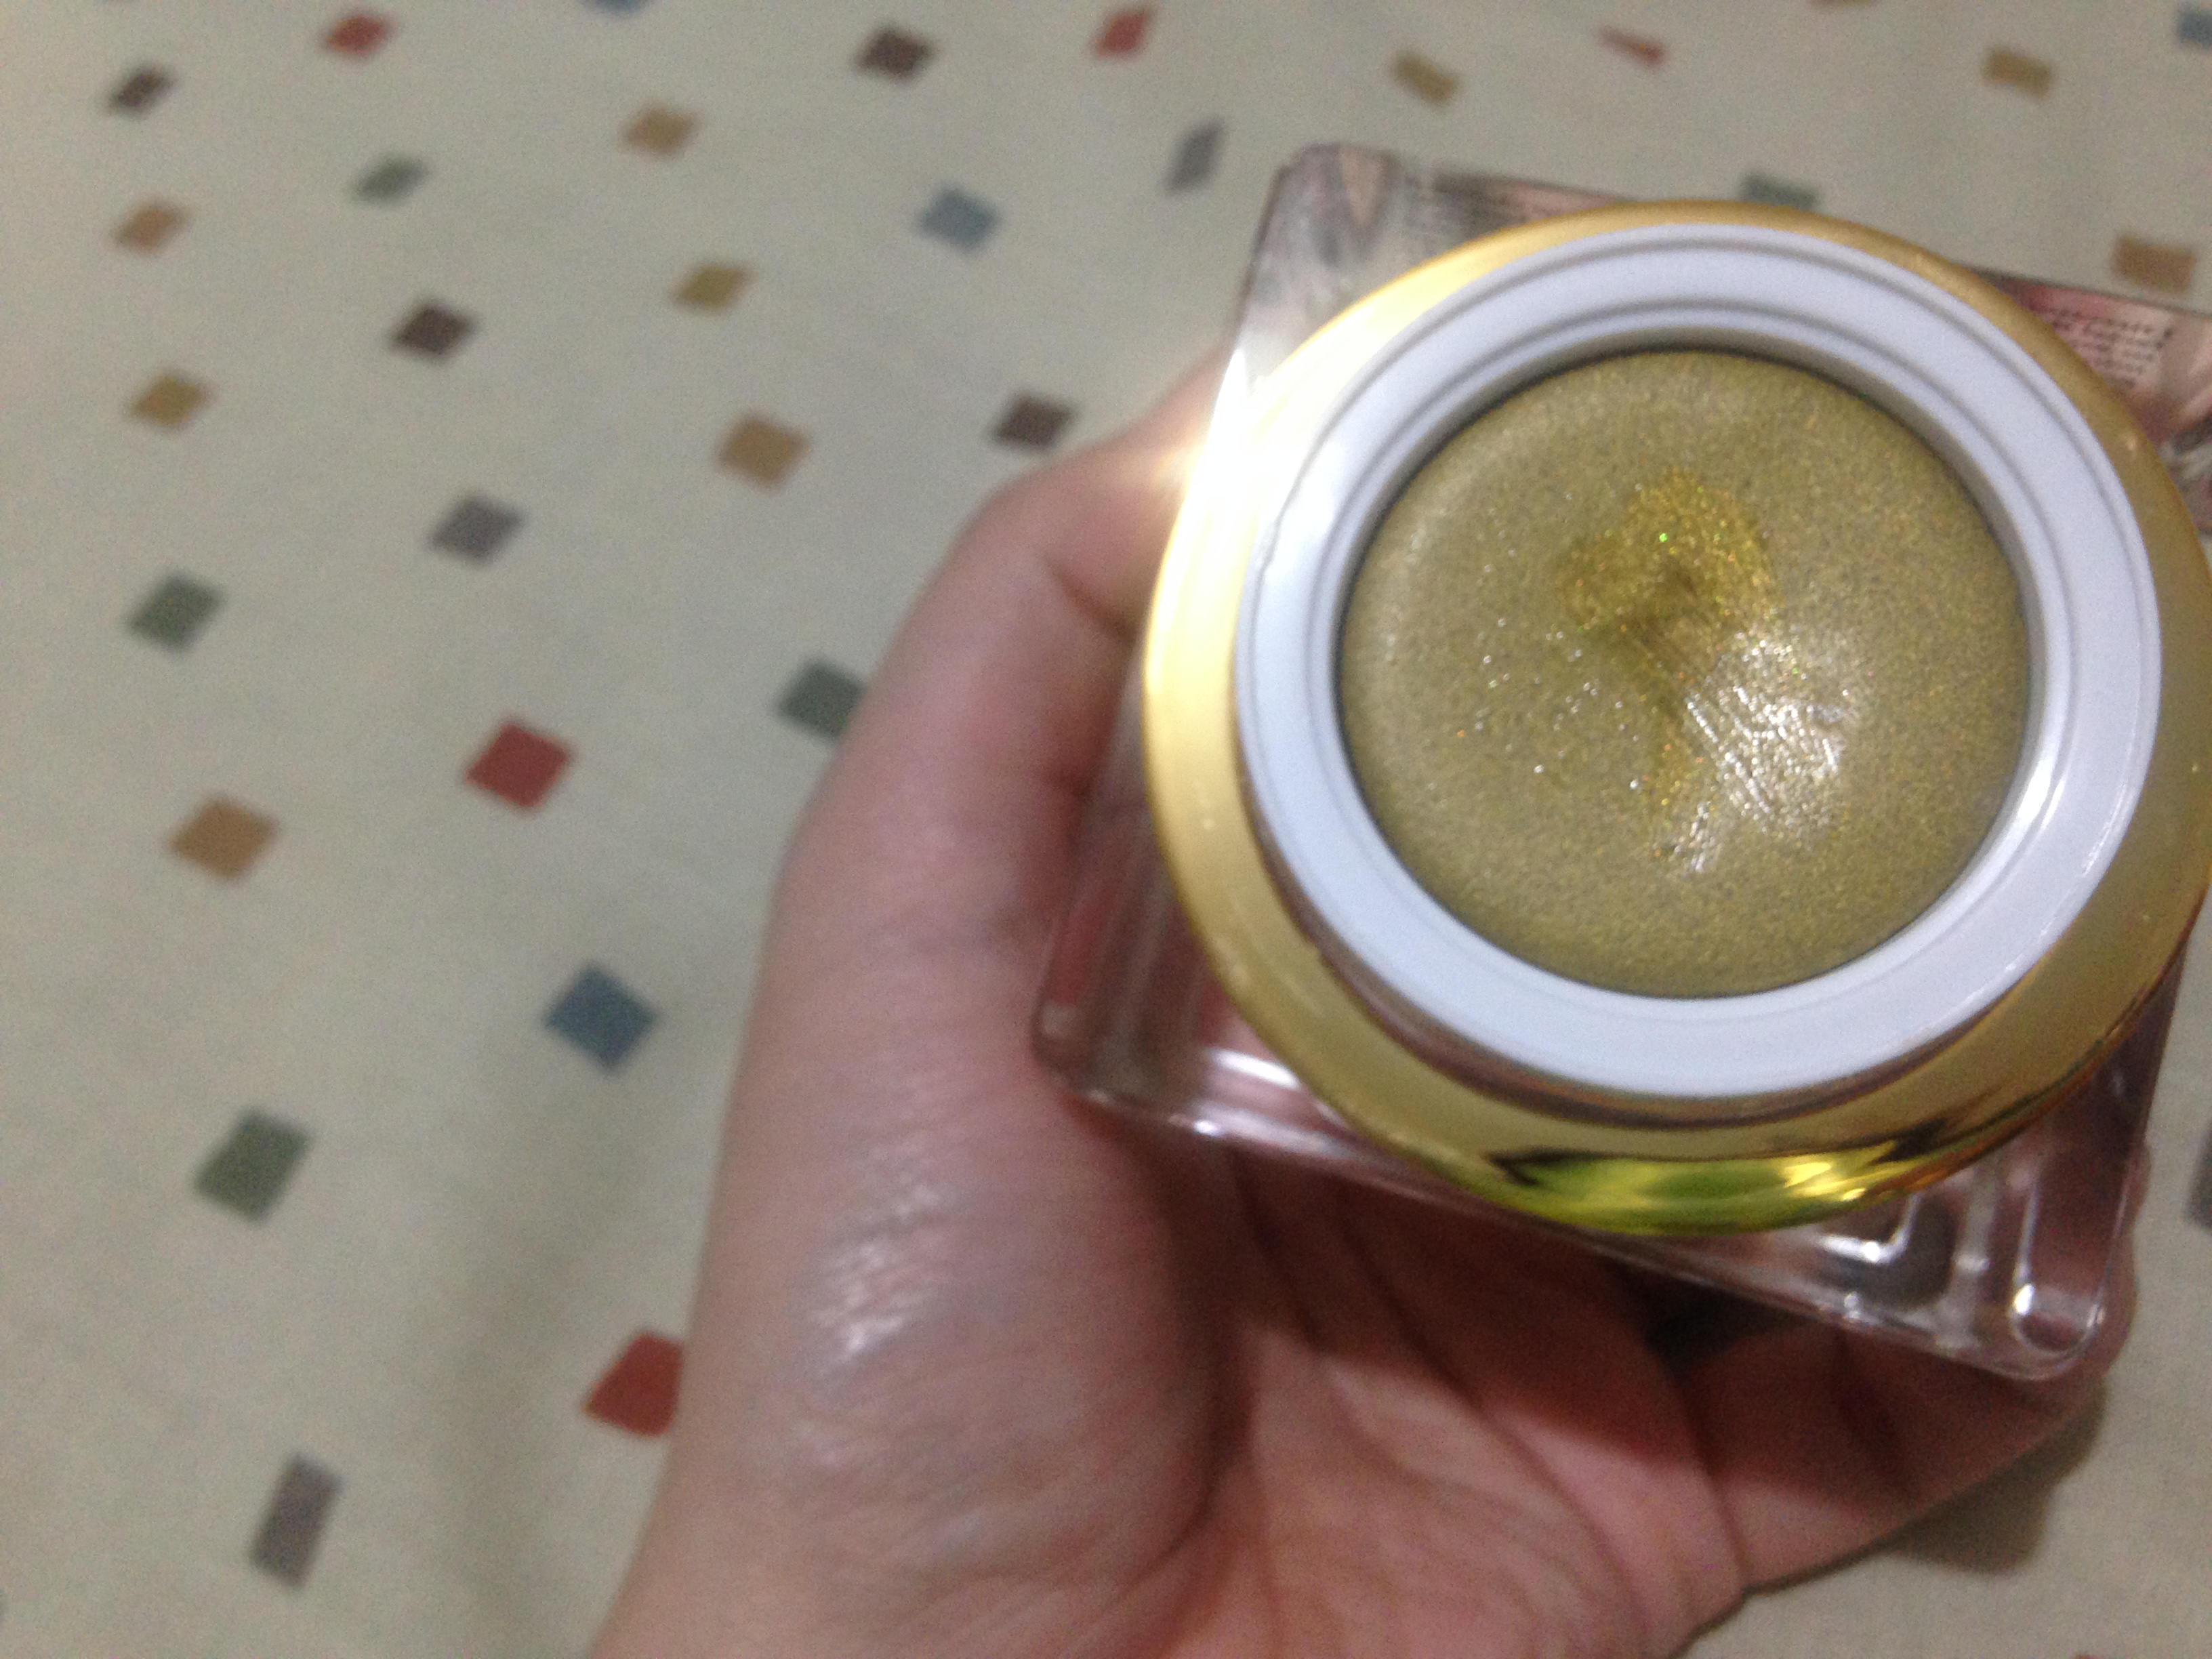 Black Pearl Cosmetics Cleopatra Mask Product Review - Opened the product Jar